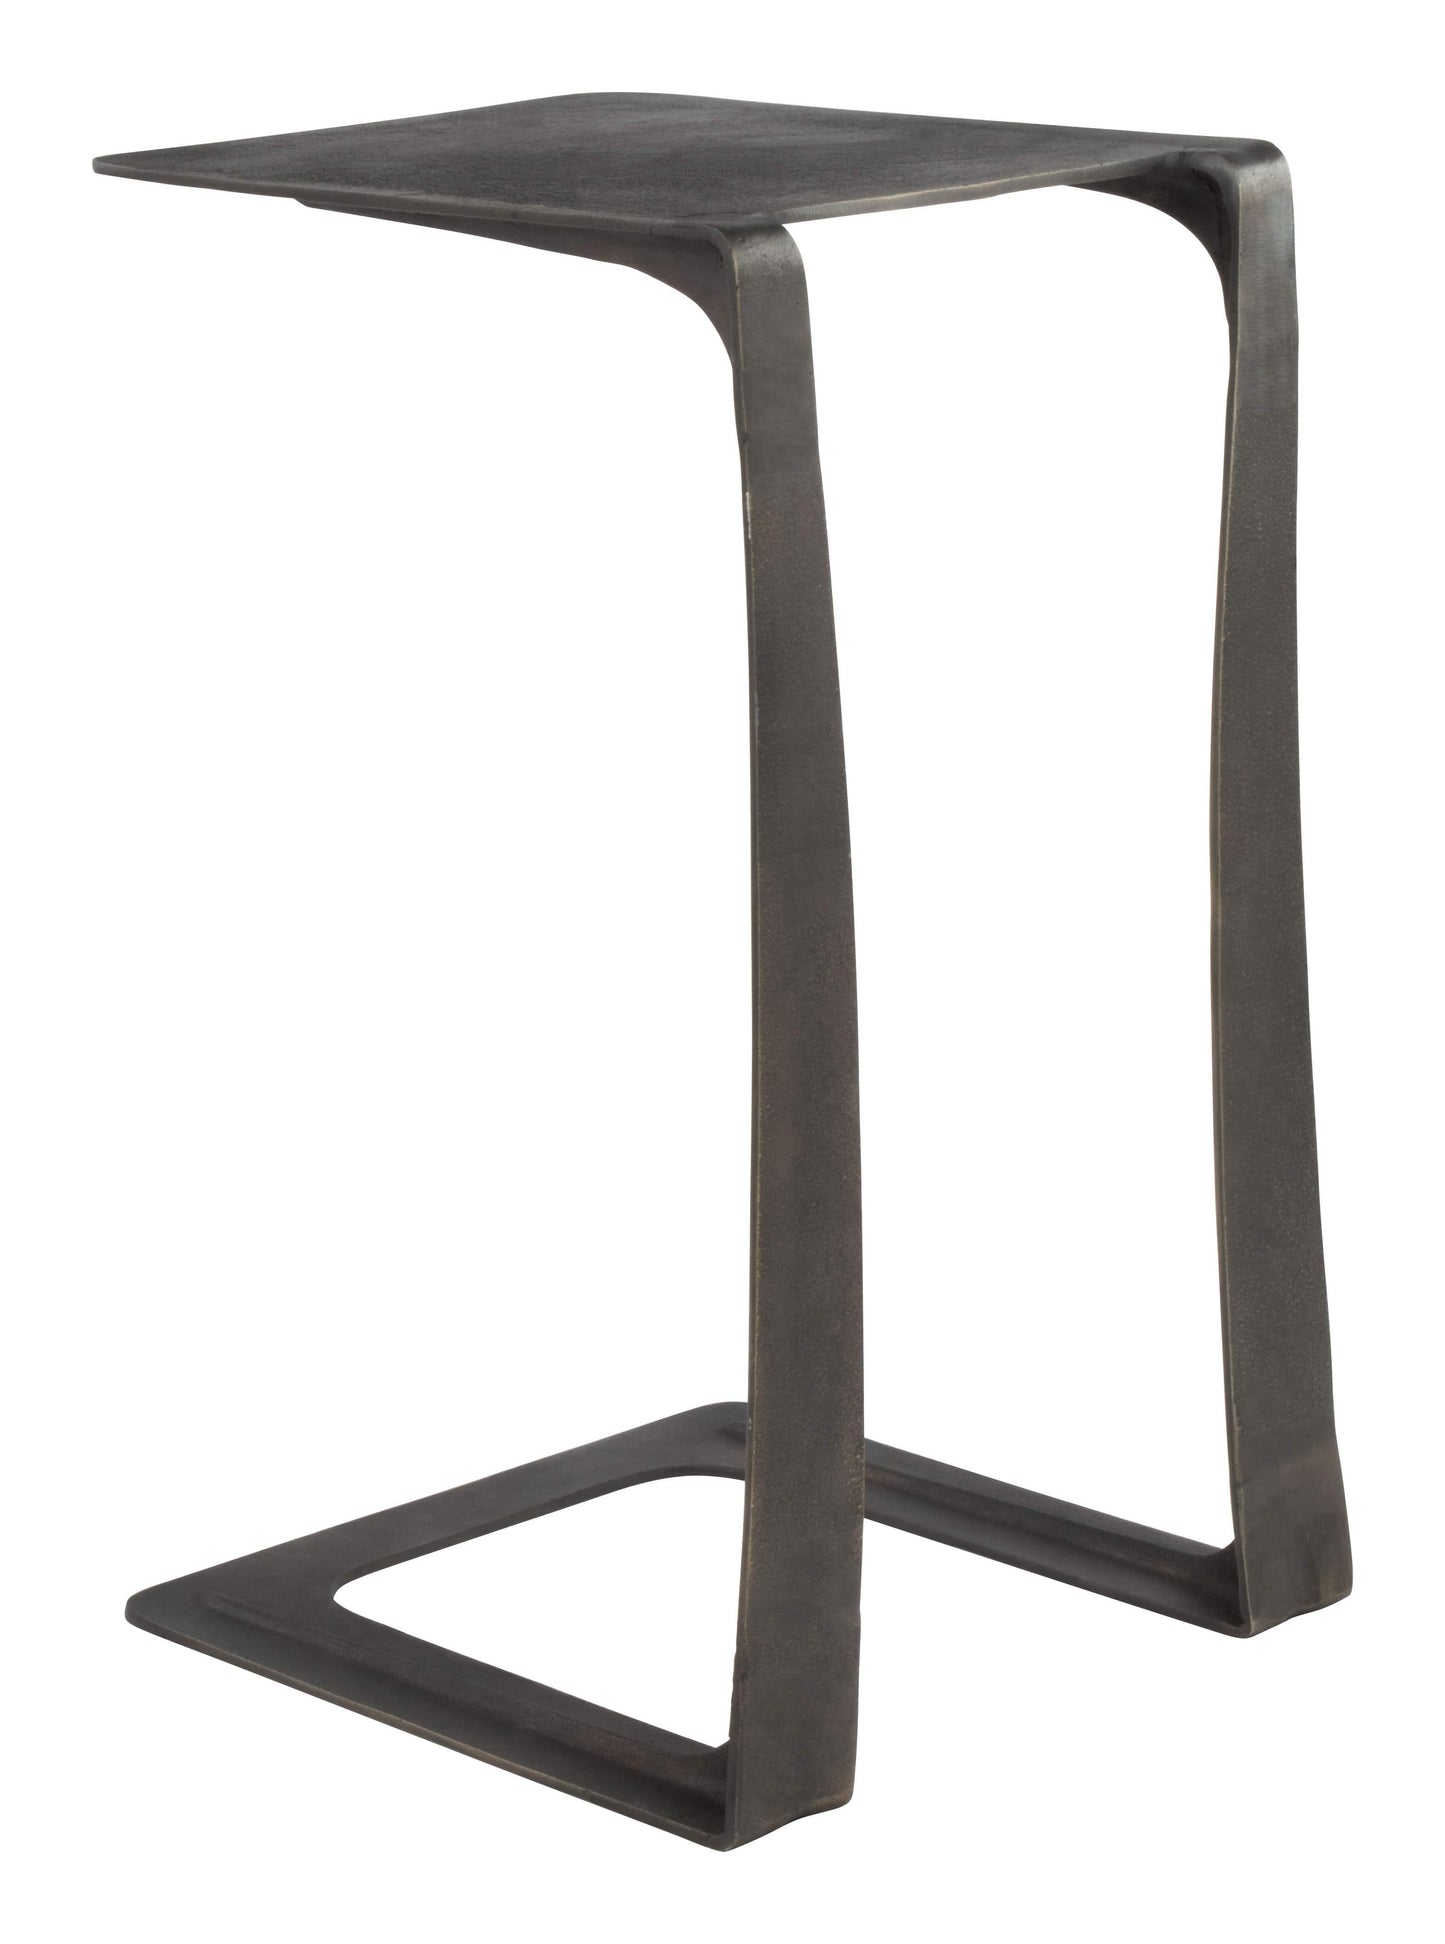 Angled back view of aluminum side table